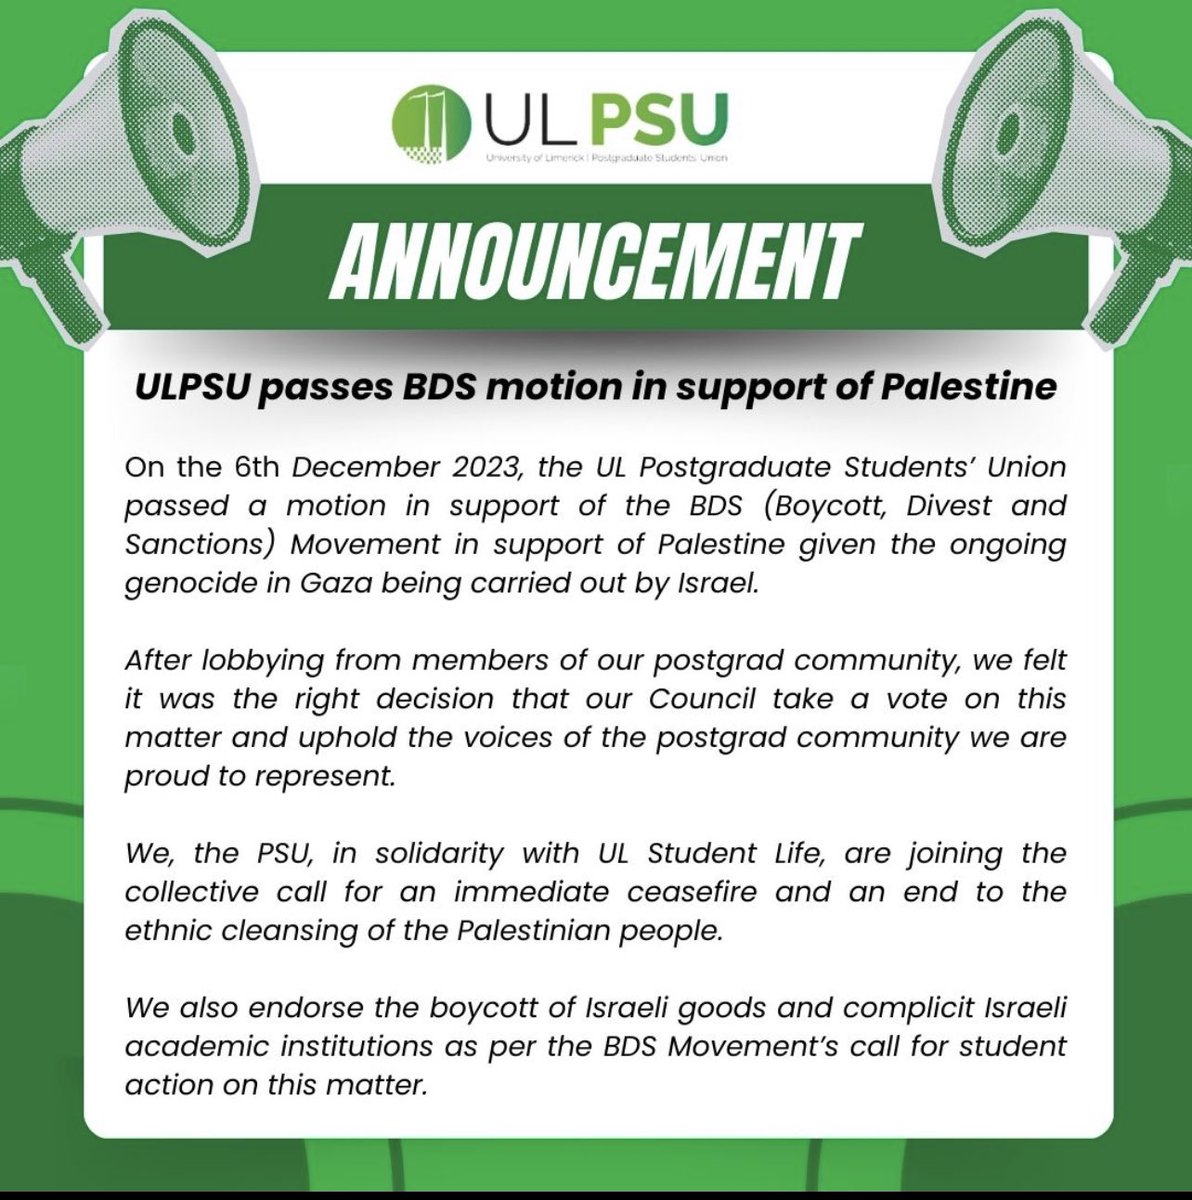 ULPSU passes BDS motion in Support of Palestine